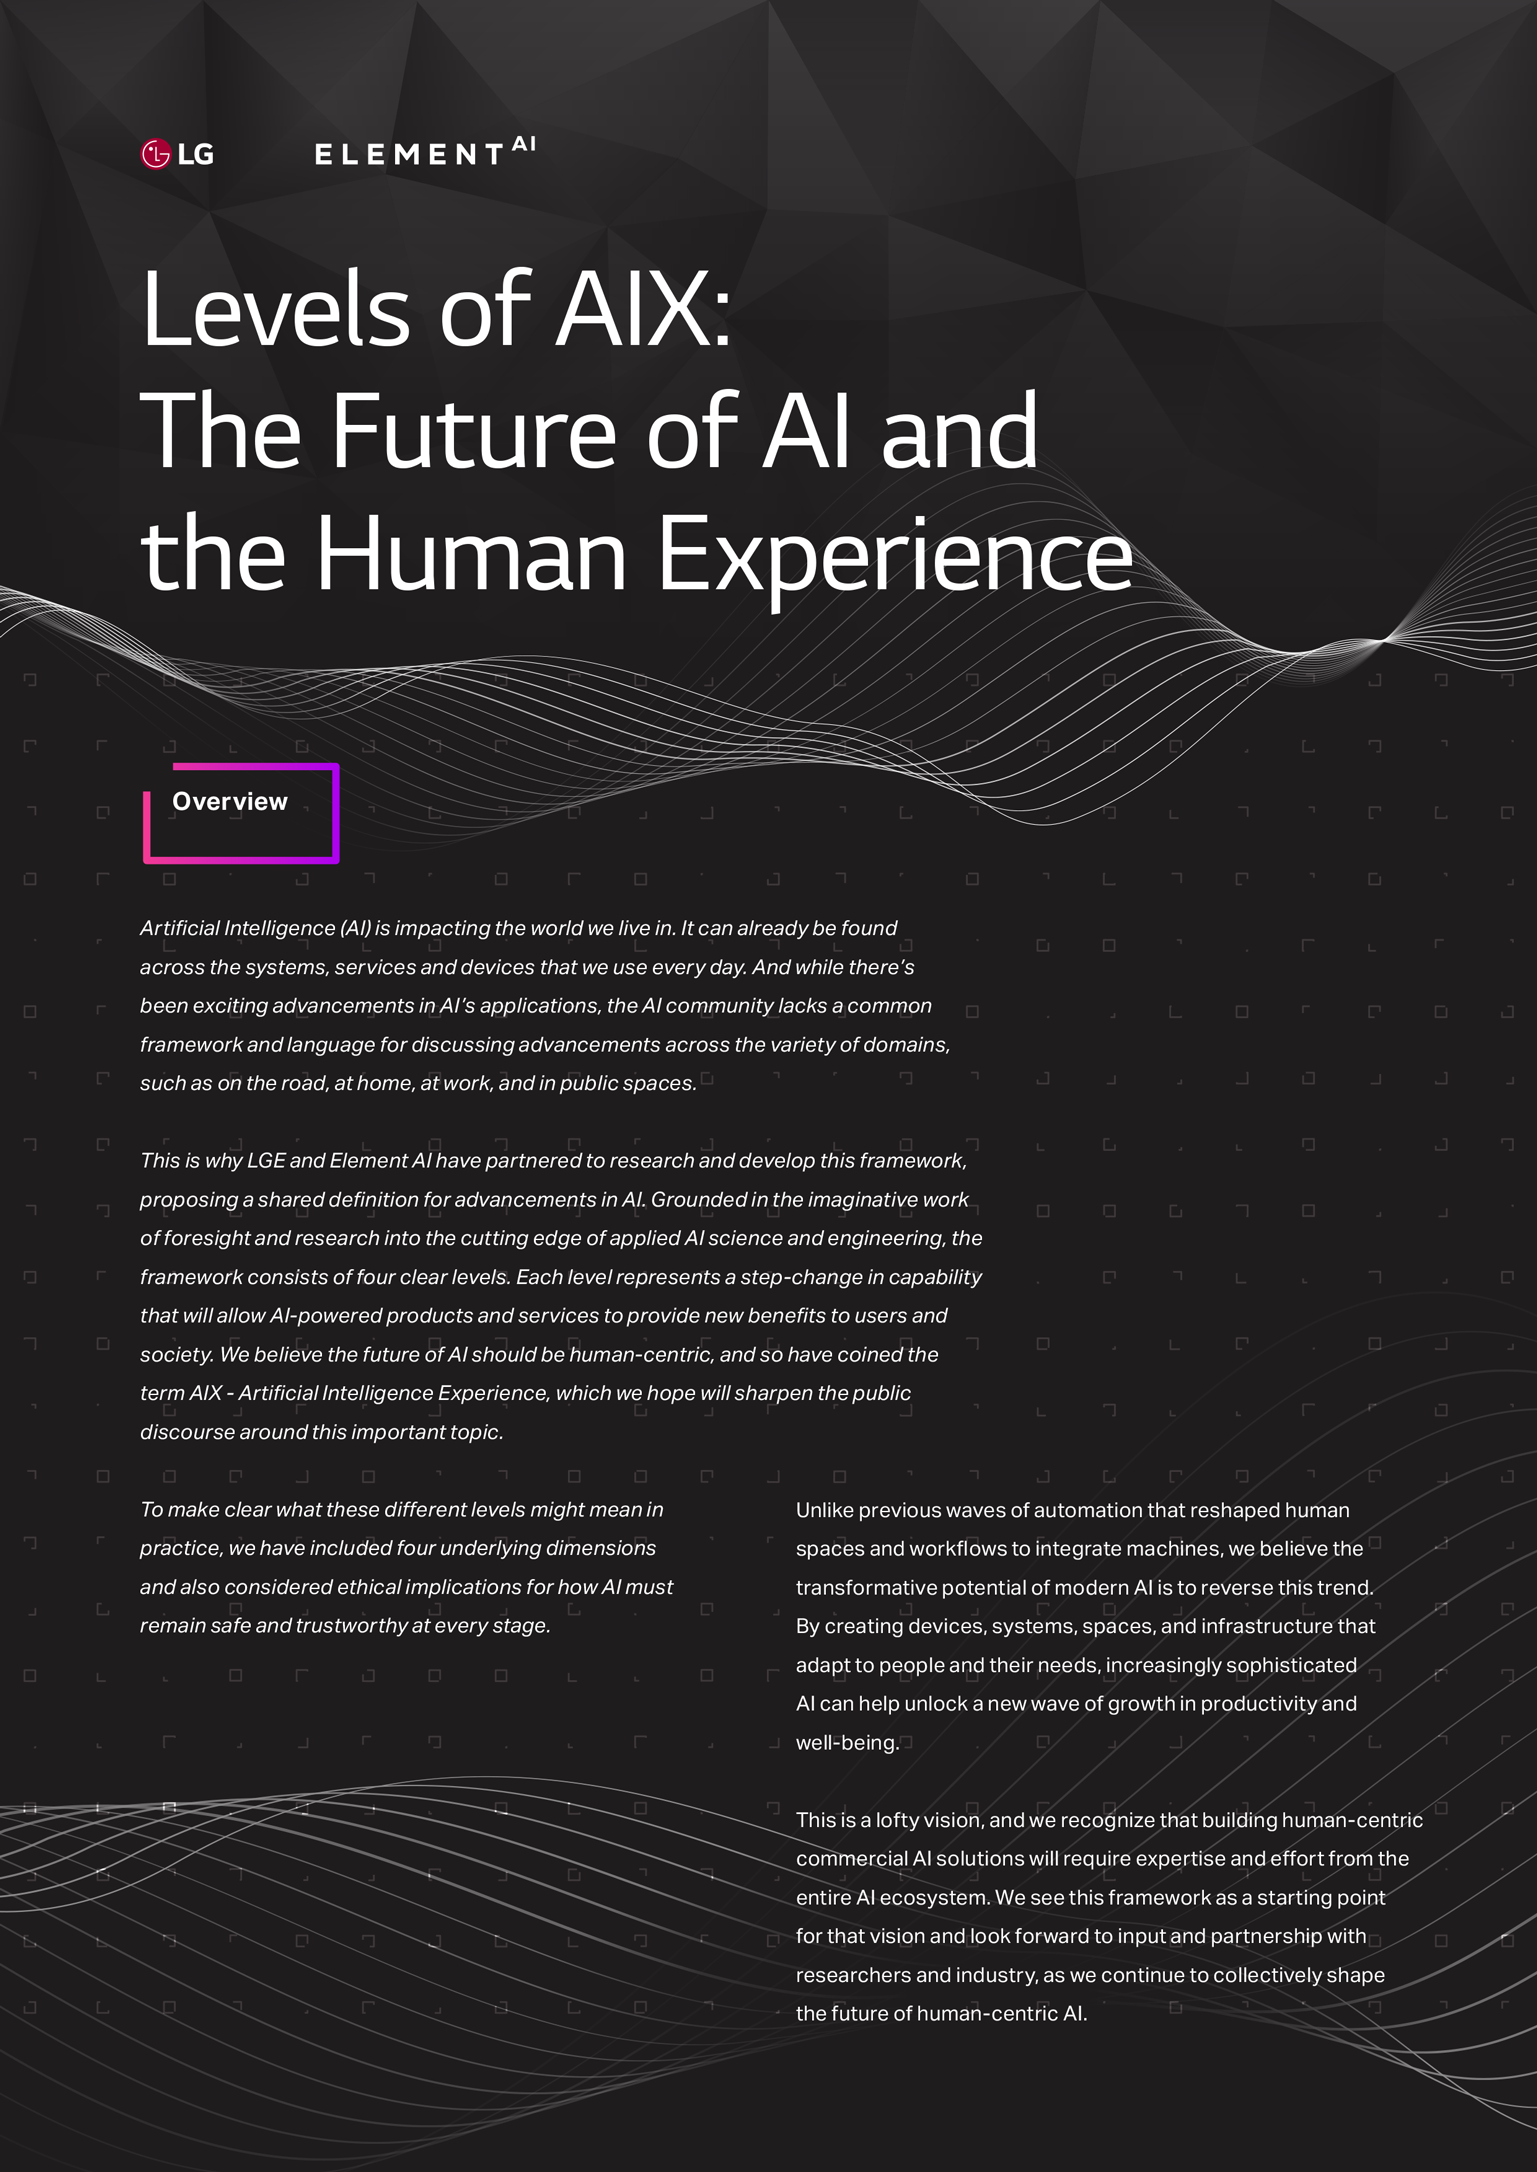 Levels of AIX: The Future of AI and the Human Experience